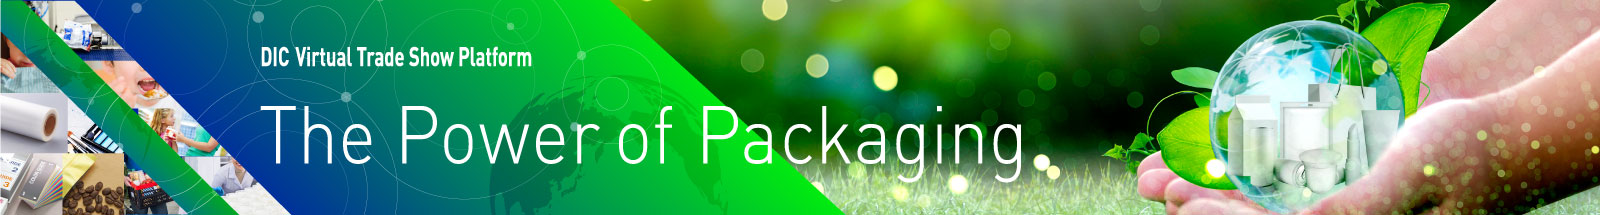 DIC Virtual Trade Show The Power of Packaging